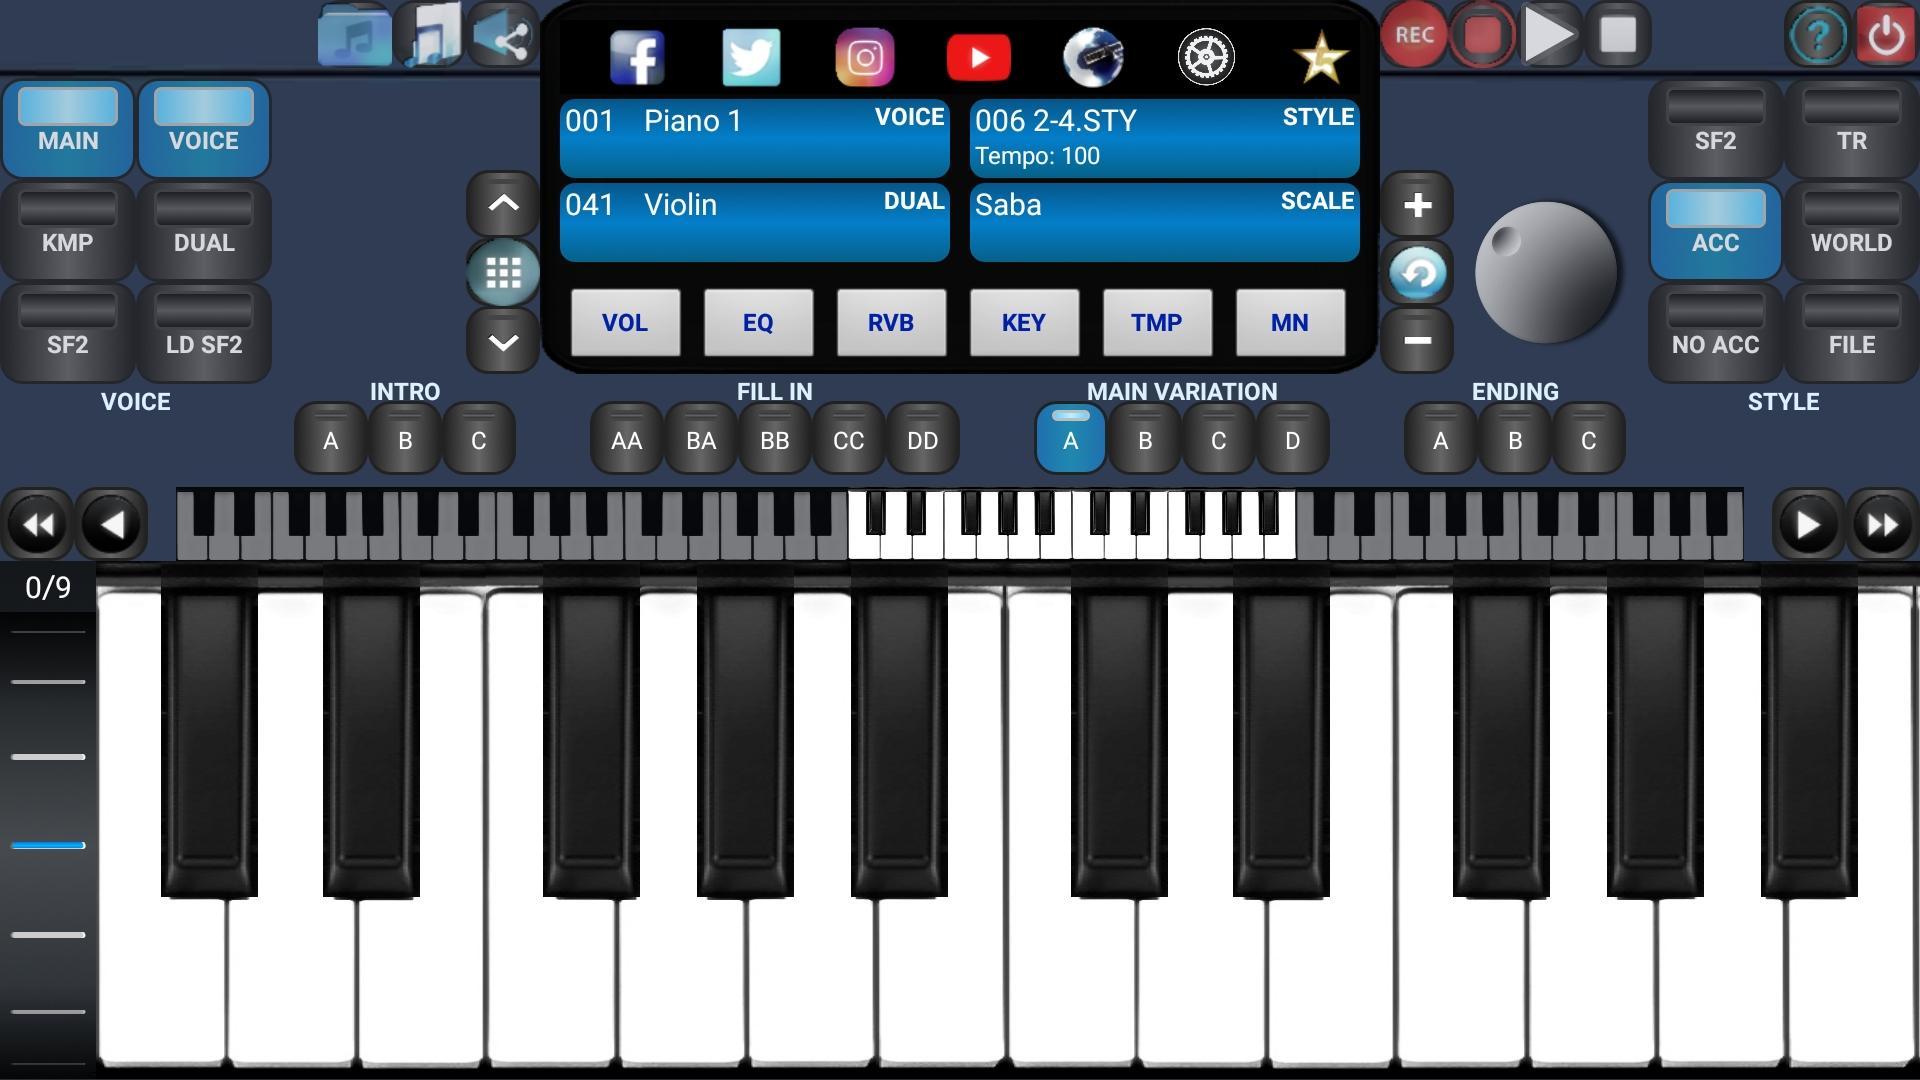 Style Musik Keyboard Yamaha : Yamaha Psrs 750 Psrs 950 Tyros Tutorials Style Creator Song Recording Multipads And More Youtube : 0 responses to yamaha styles.sty downloads.